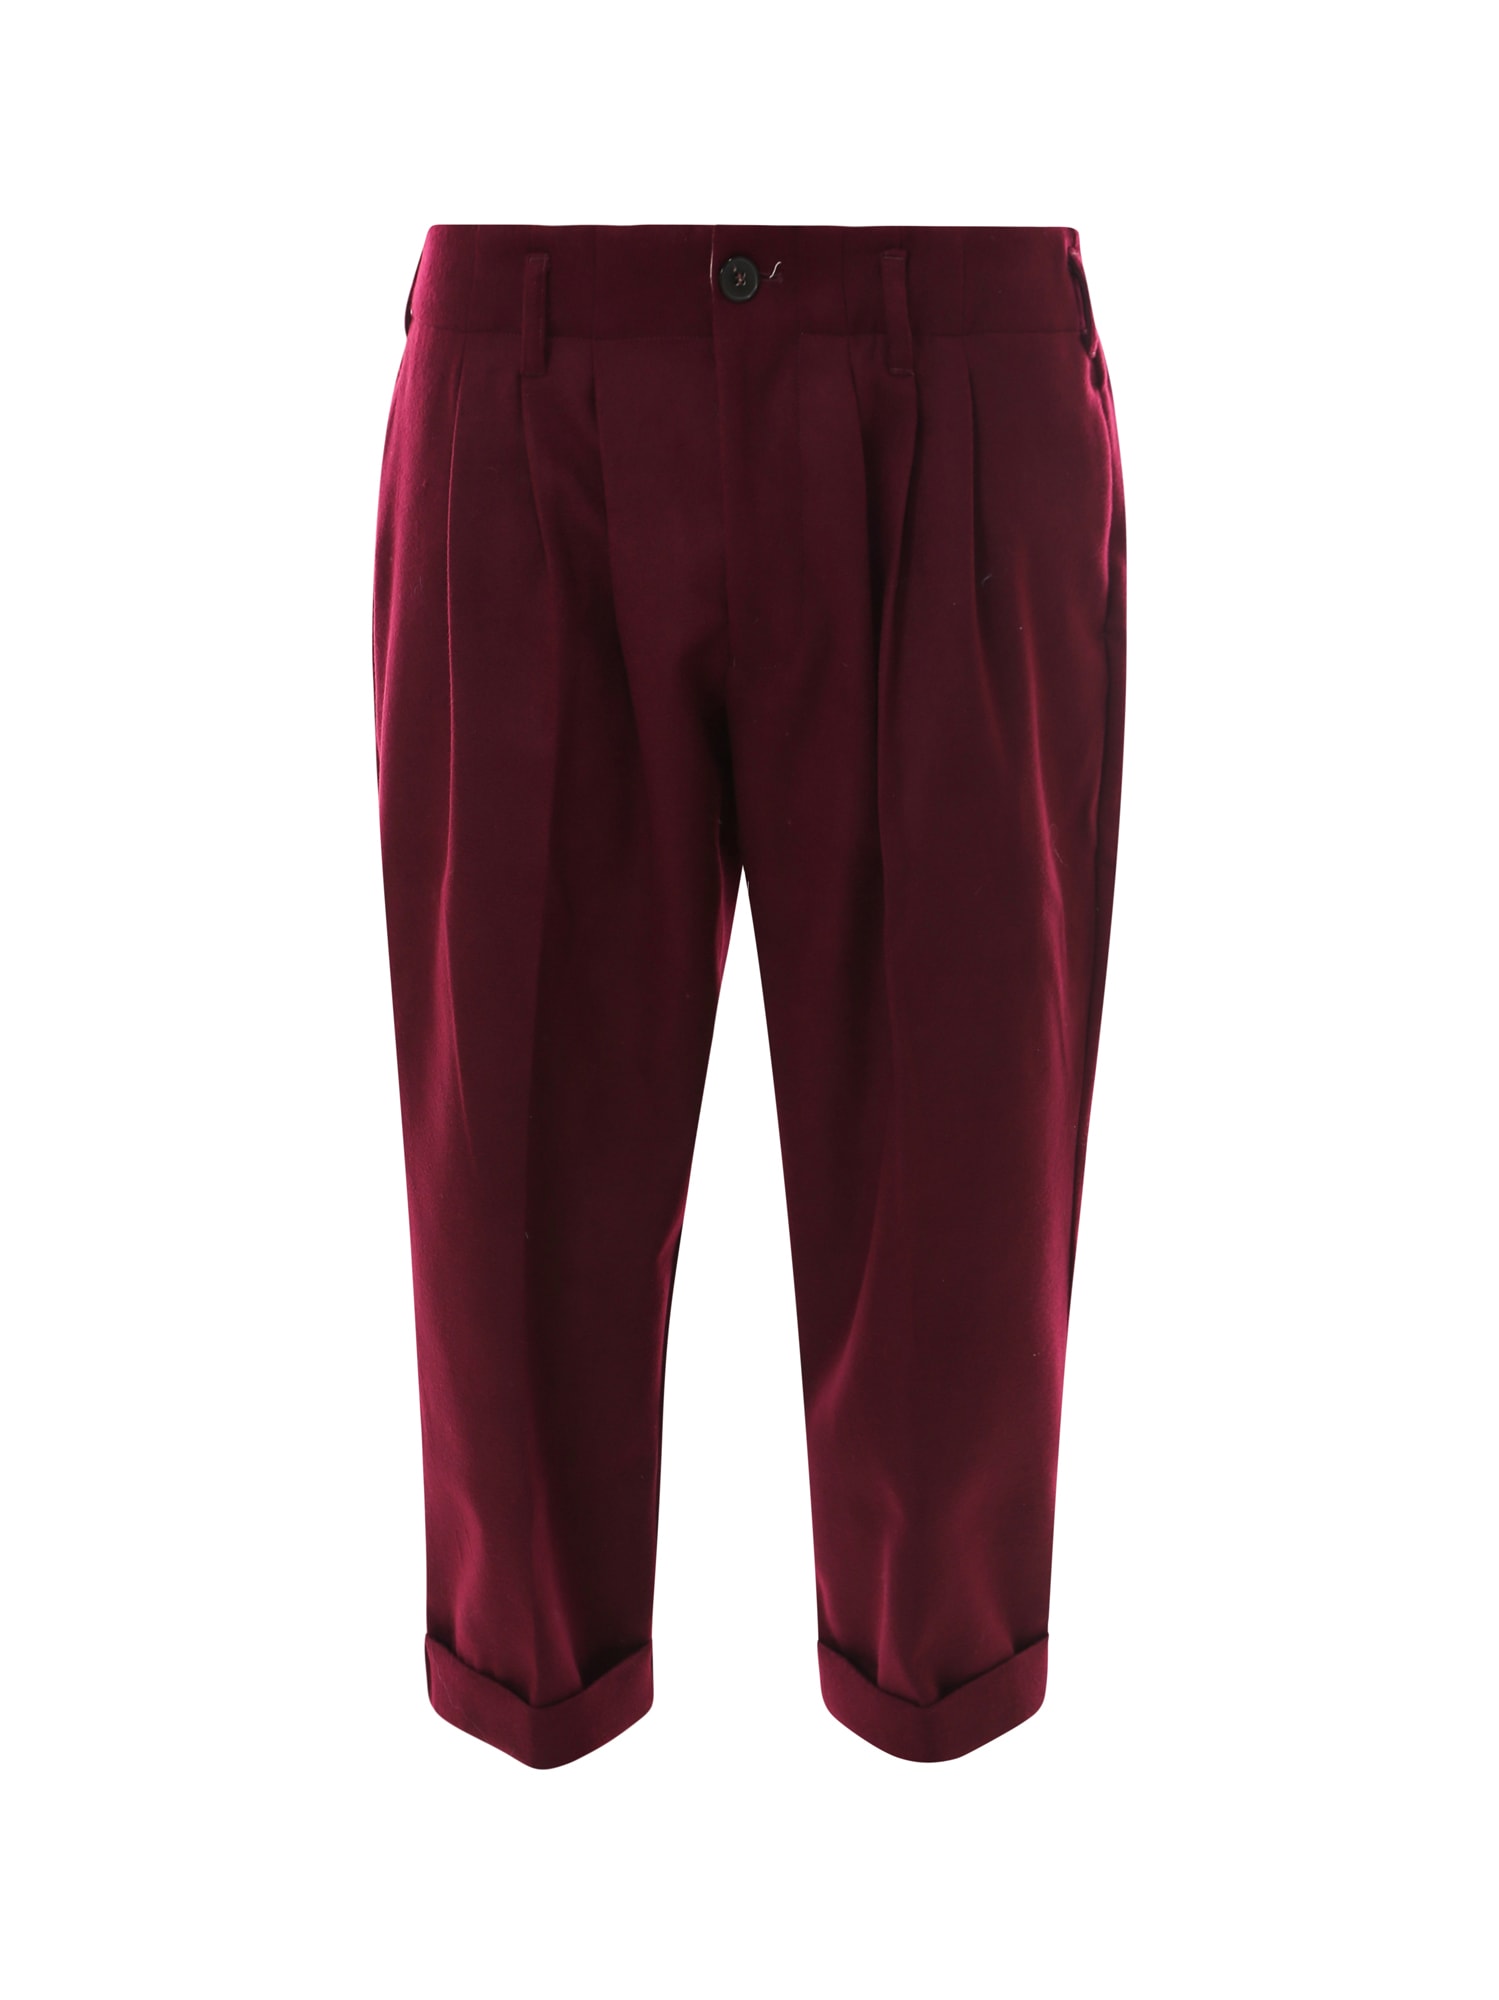 THE SILTED COMPANY TROUSER,OSSTBY BURGUNDY